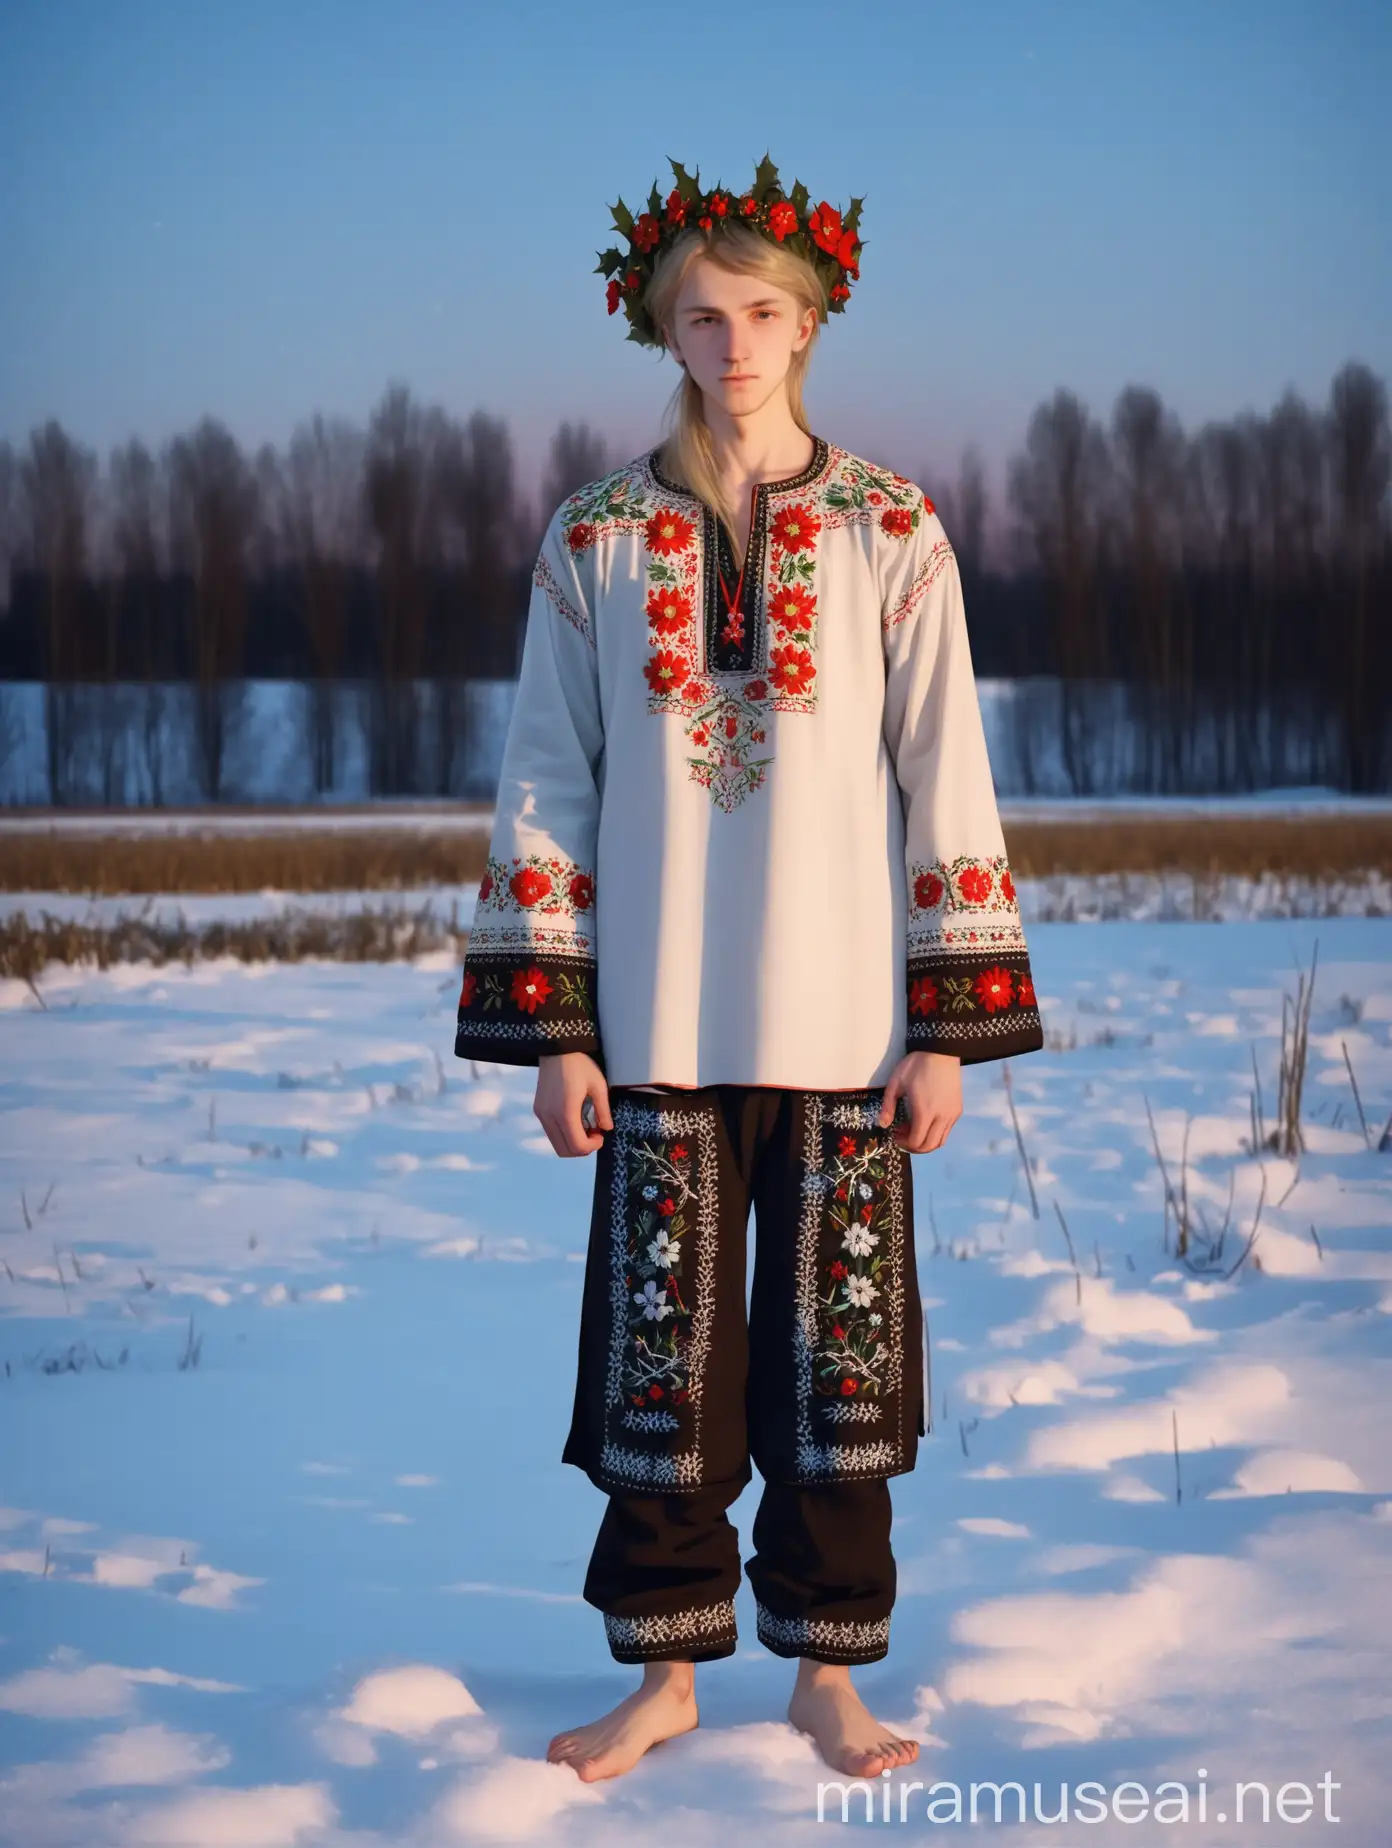 Slavic Youth in Traditional Attire Walking Barefoot in Winter Snow